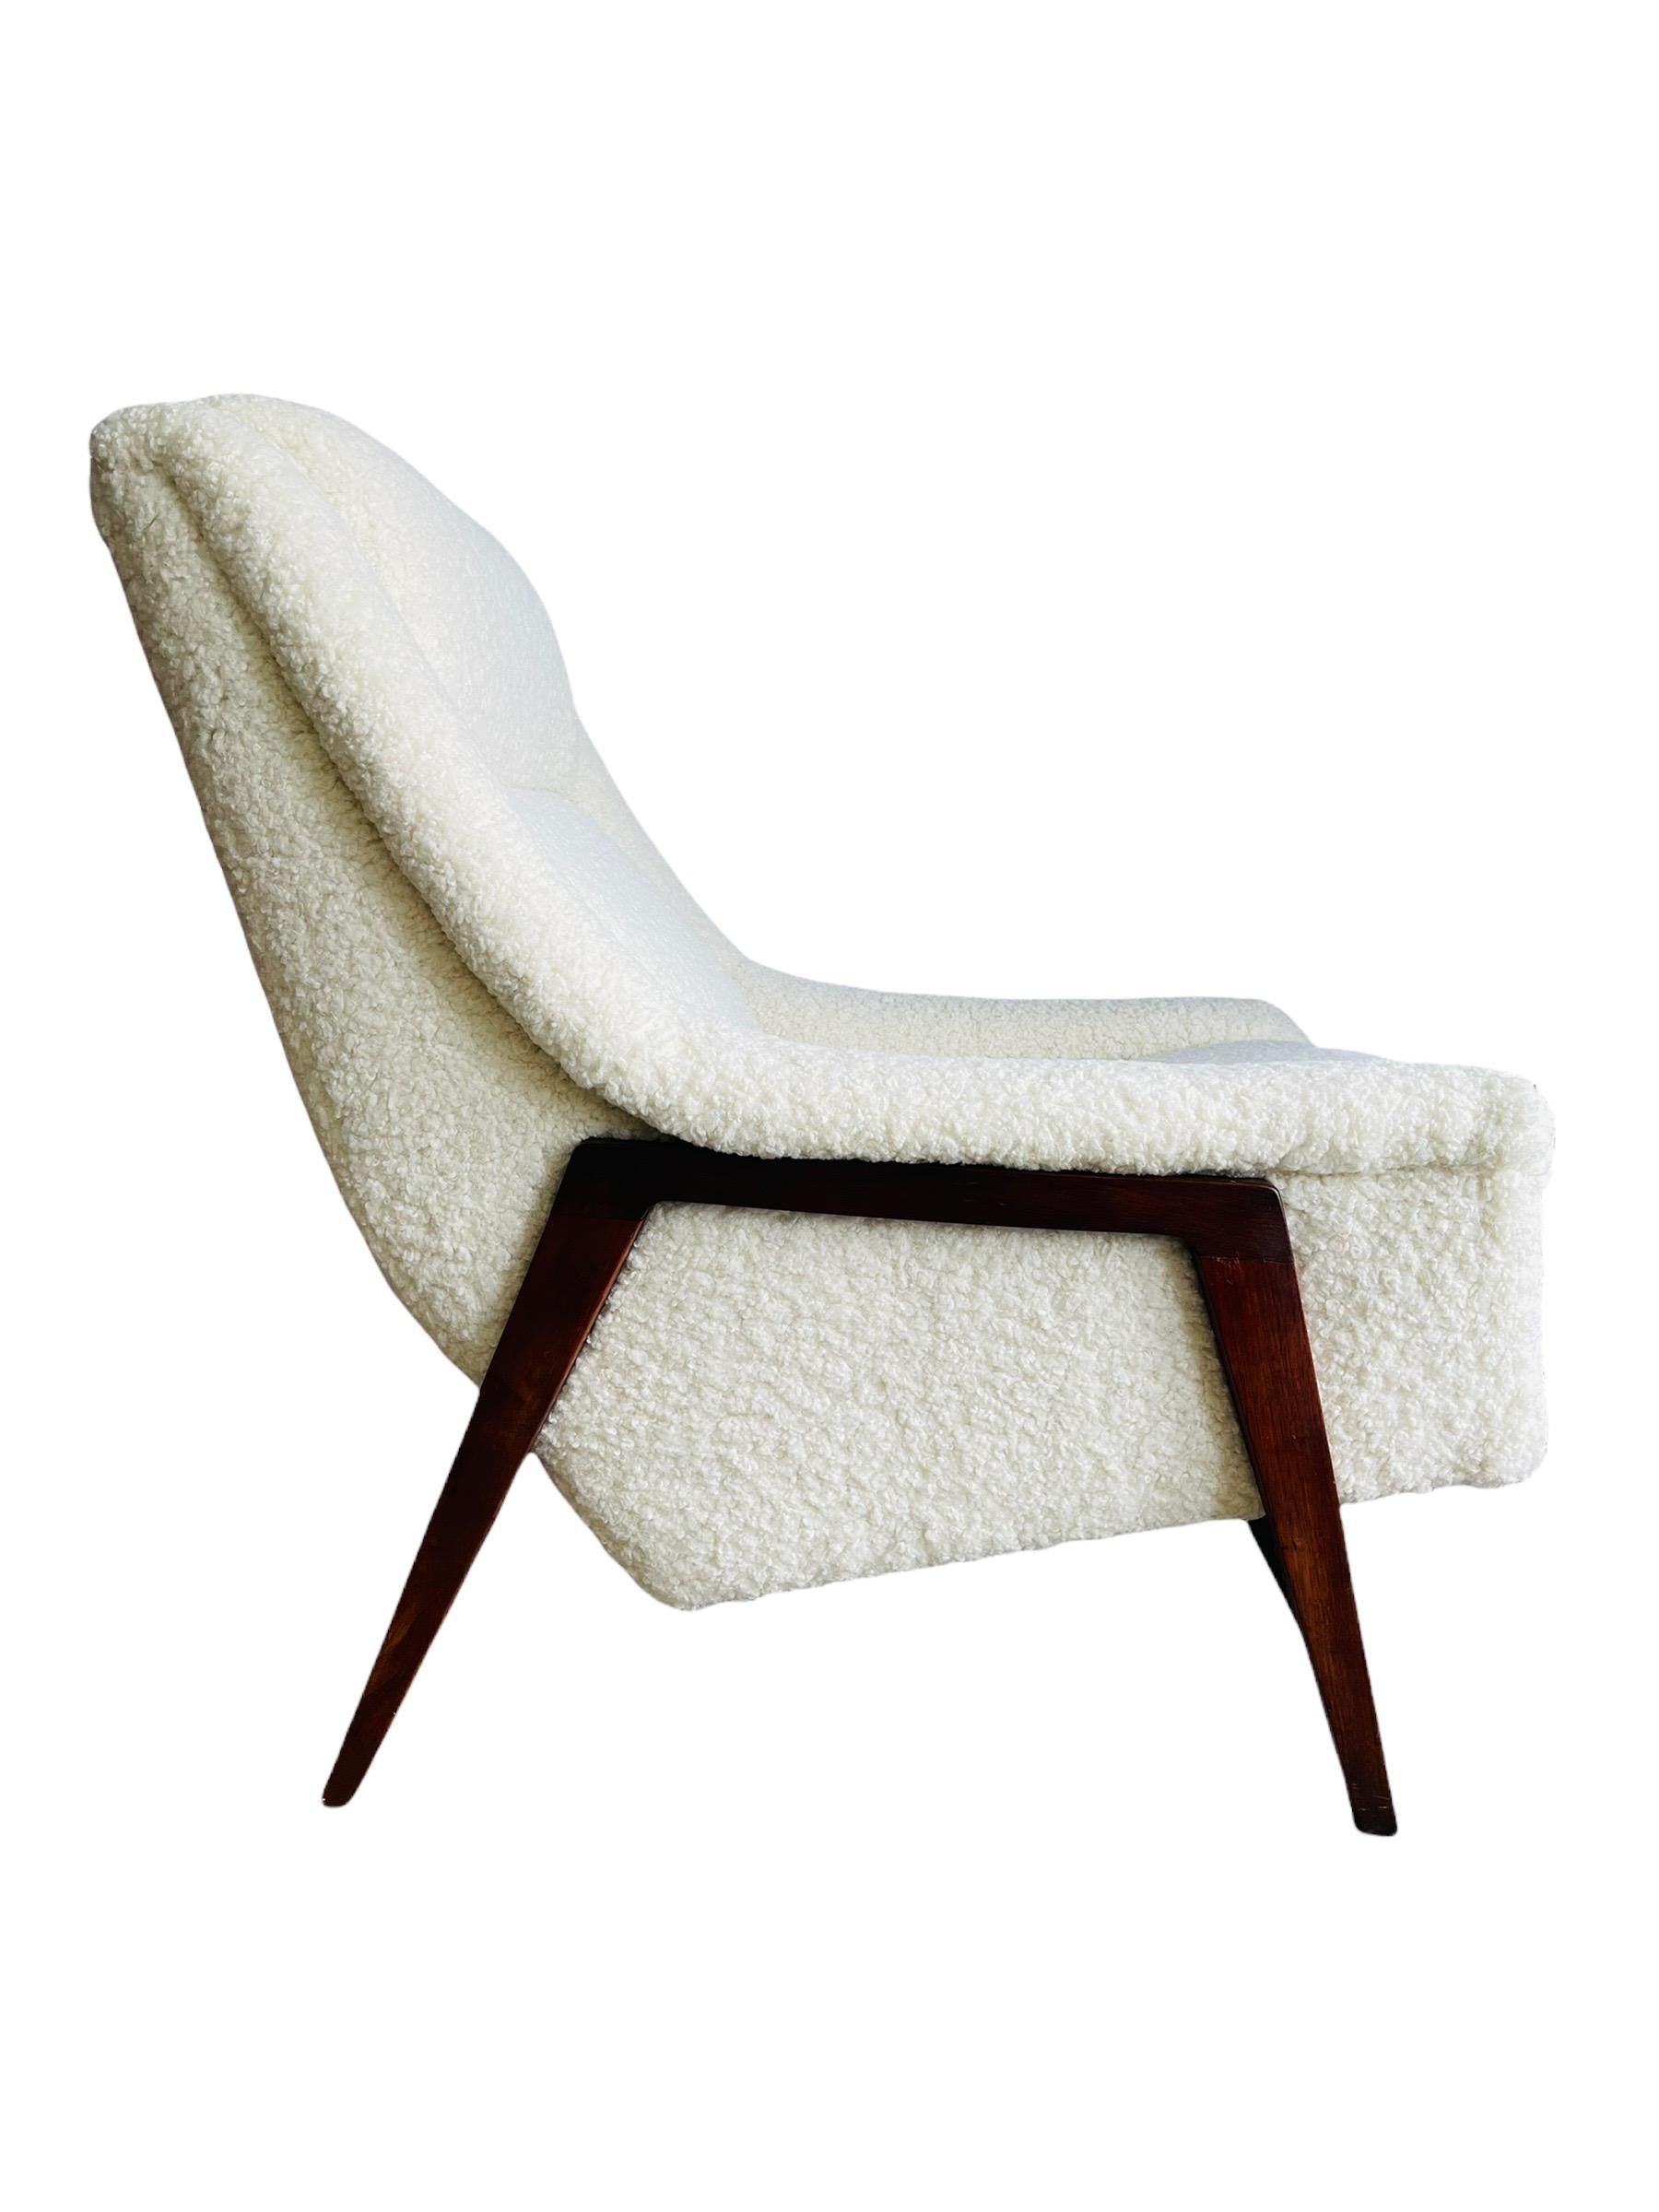 Swedish Stunning Folke Ohlsson Profil Chair Lounge Chair for DUX Boucle